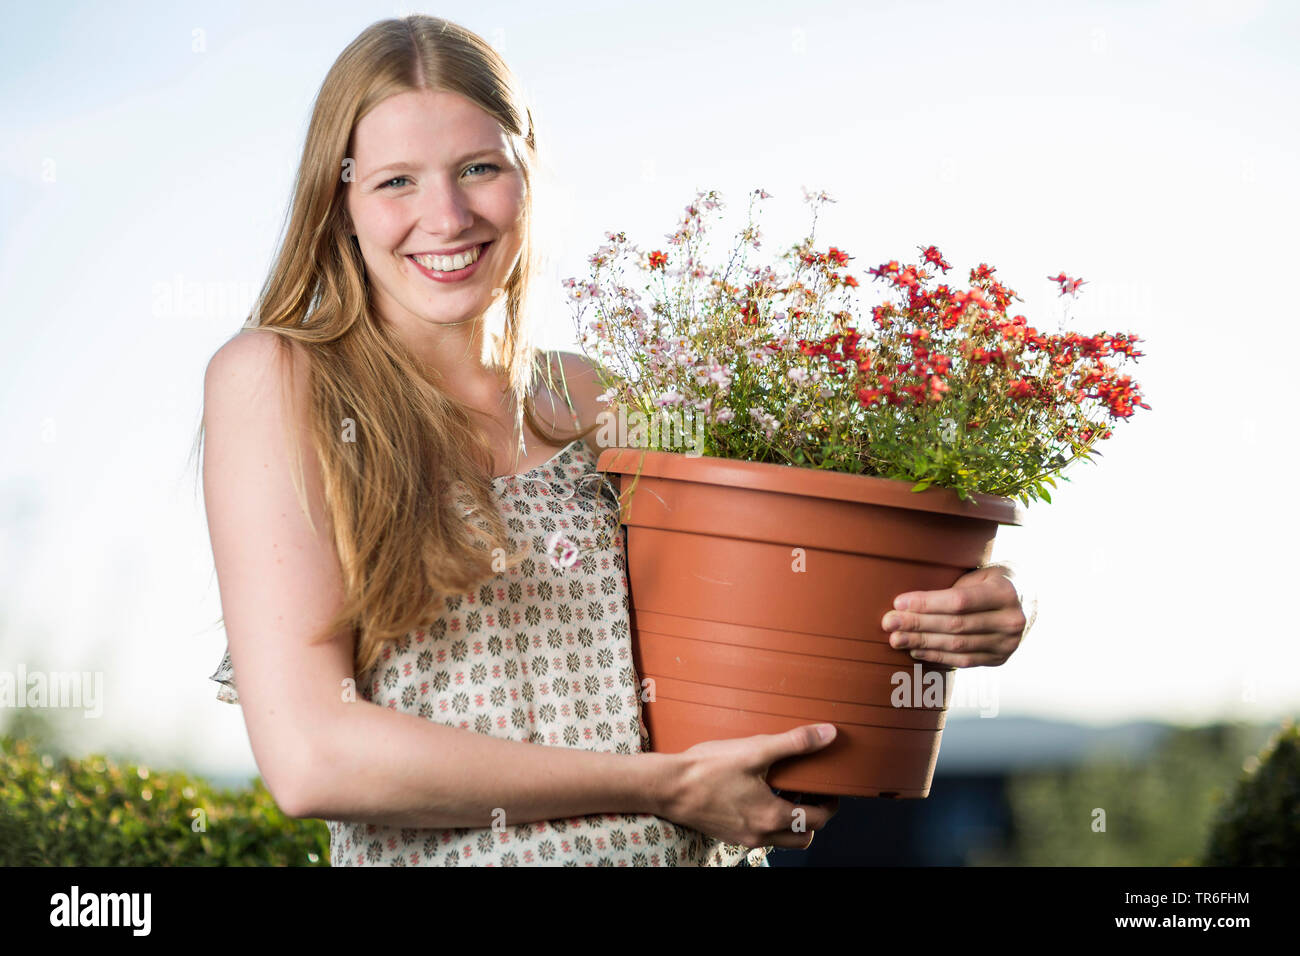 young blond woman with a pot plant in arm, Germany Stock Photo